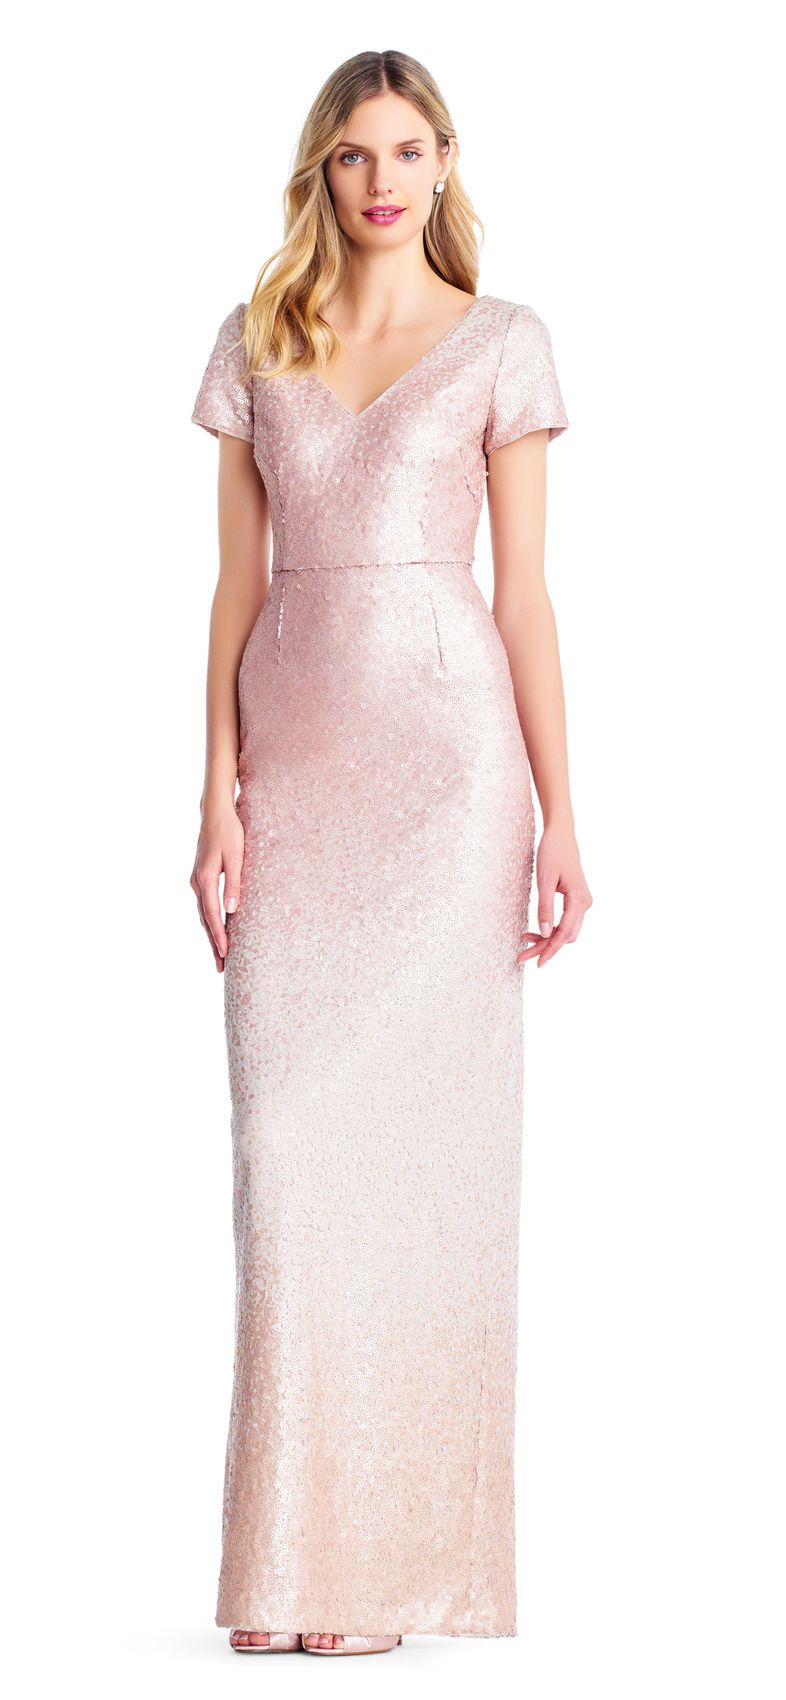 Adrianna Papell - AP1E203460 Sequin Embellished V-Neck Dress In Pink and Multi-Color